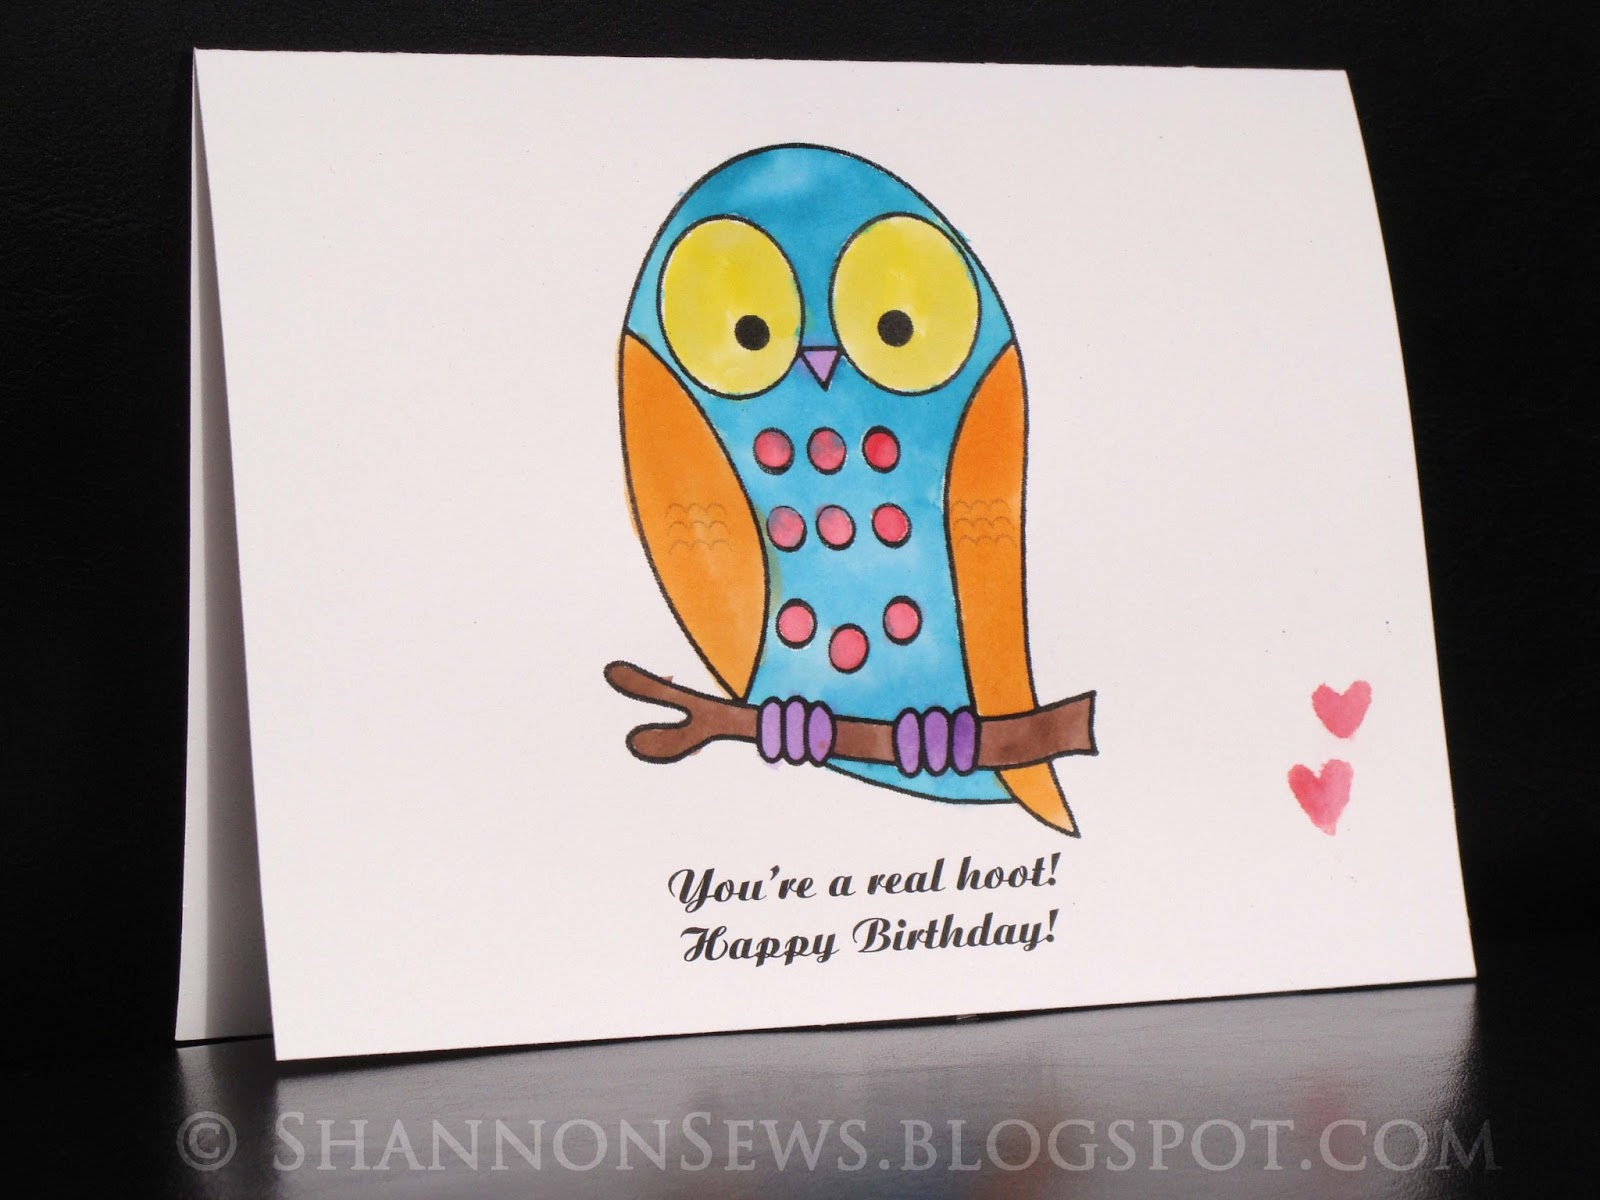 Cute Homemade Birthday Card Ideas Watercolor Birthday Card Ideas At Getdrawings Free For